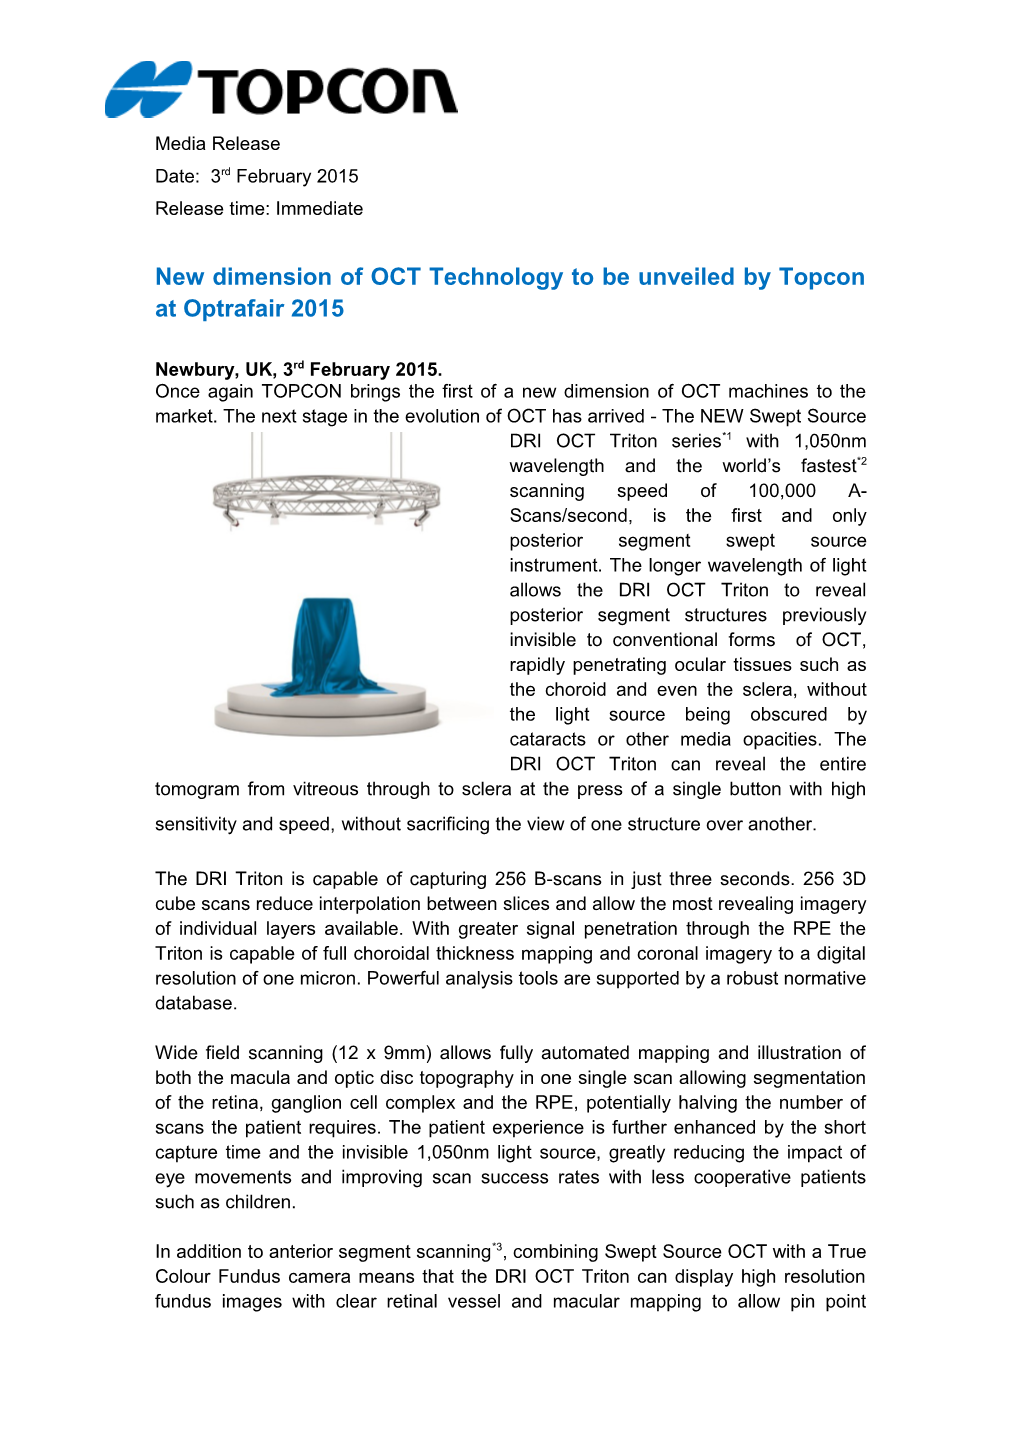 New Dimension of OCT Technology to Be Unveiled by Topcon at Optrafair 2015